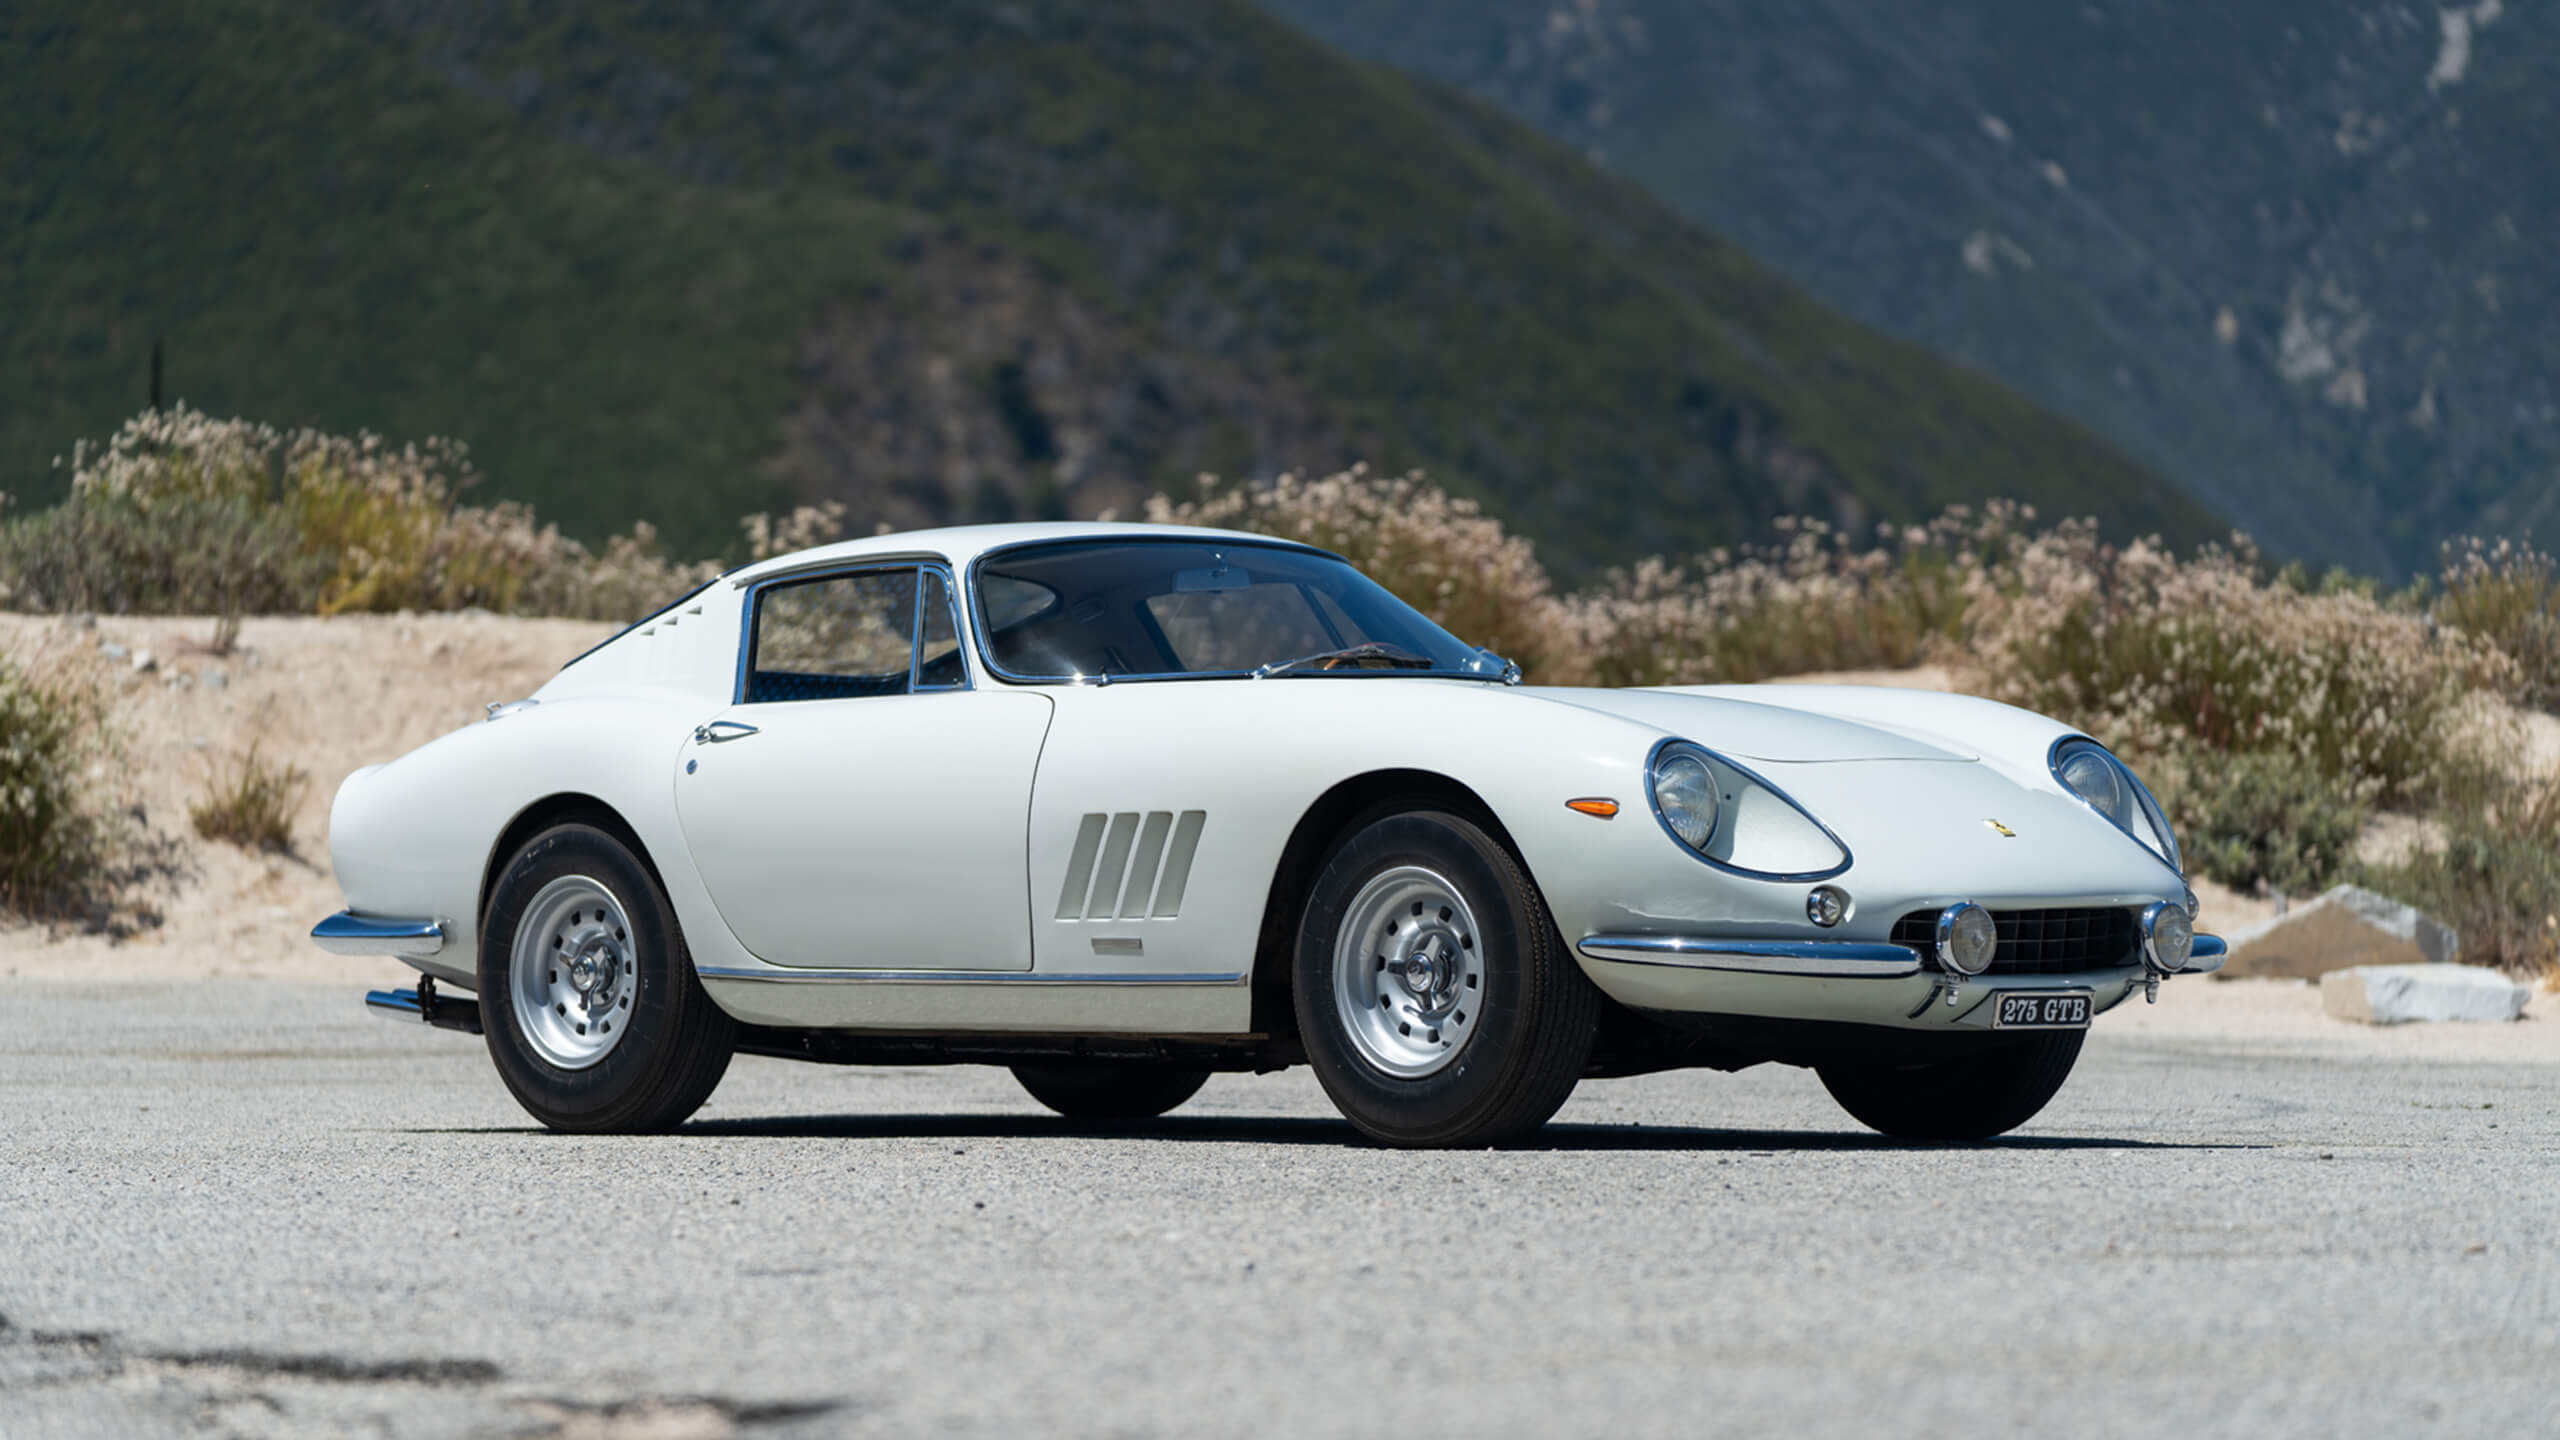 Gooding’s $14.3m August 2020 Geared Online sale